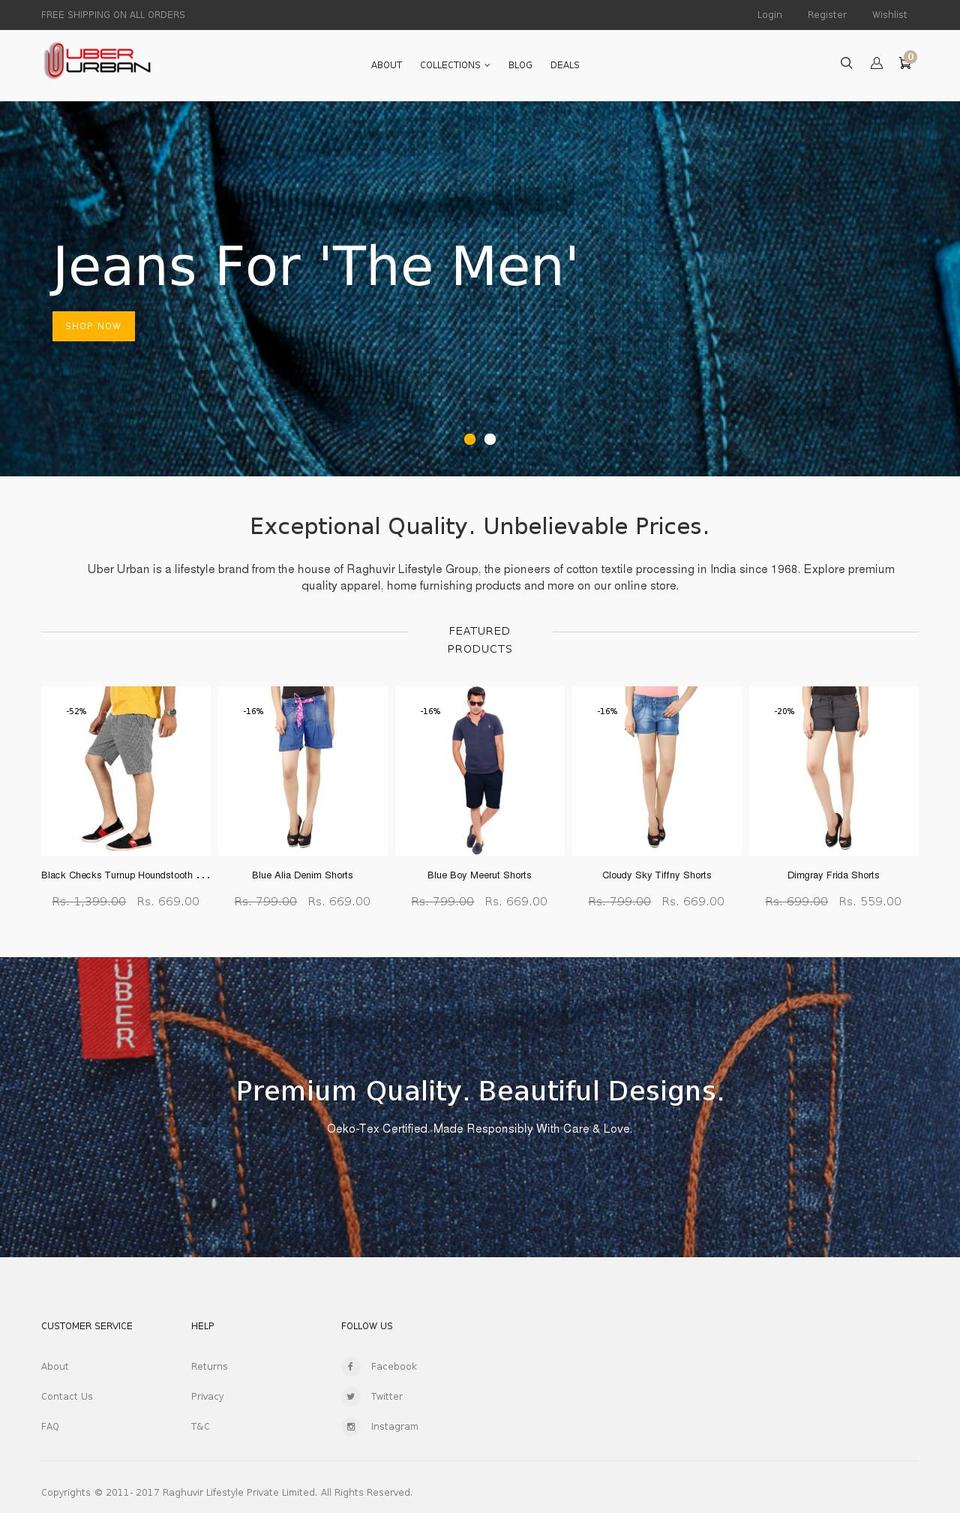 Simple Shopify theme site example uberurban.in